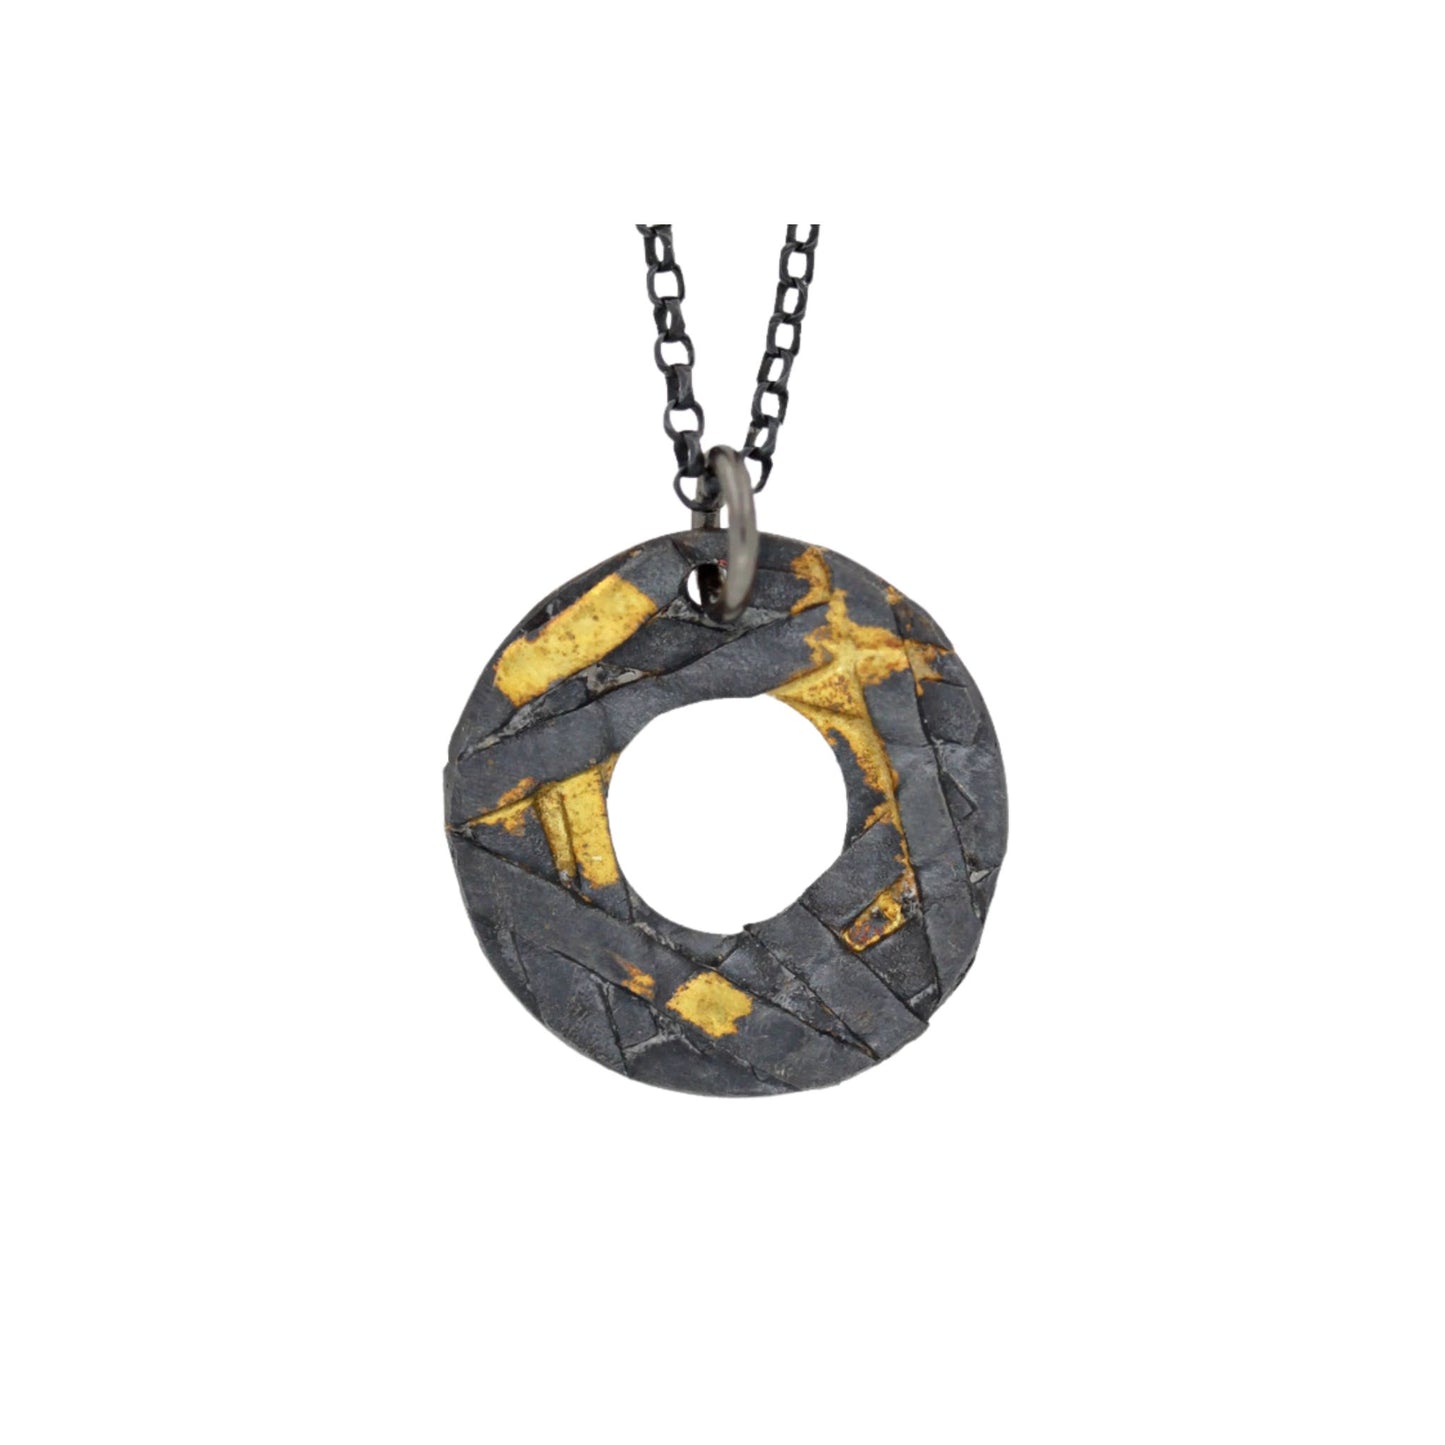 Round washer mixed metal necklace by Jen Lesea Designs